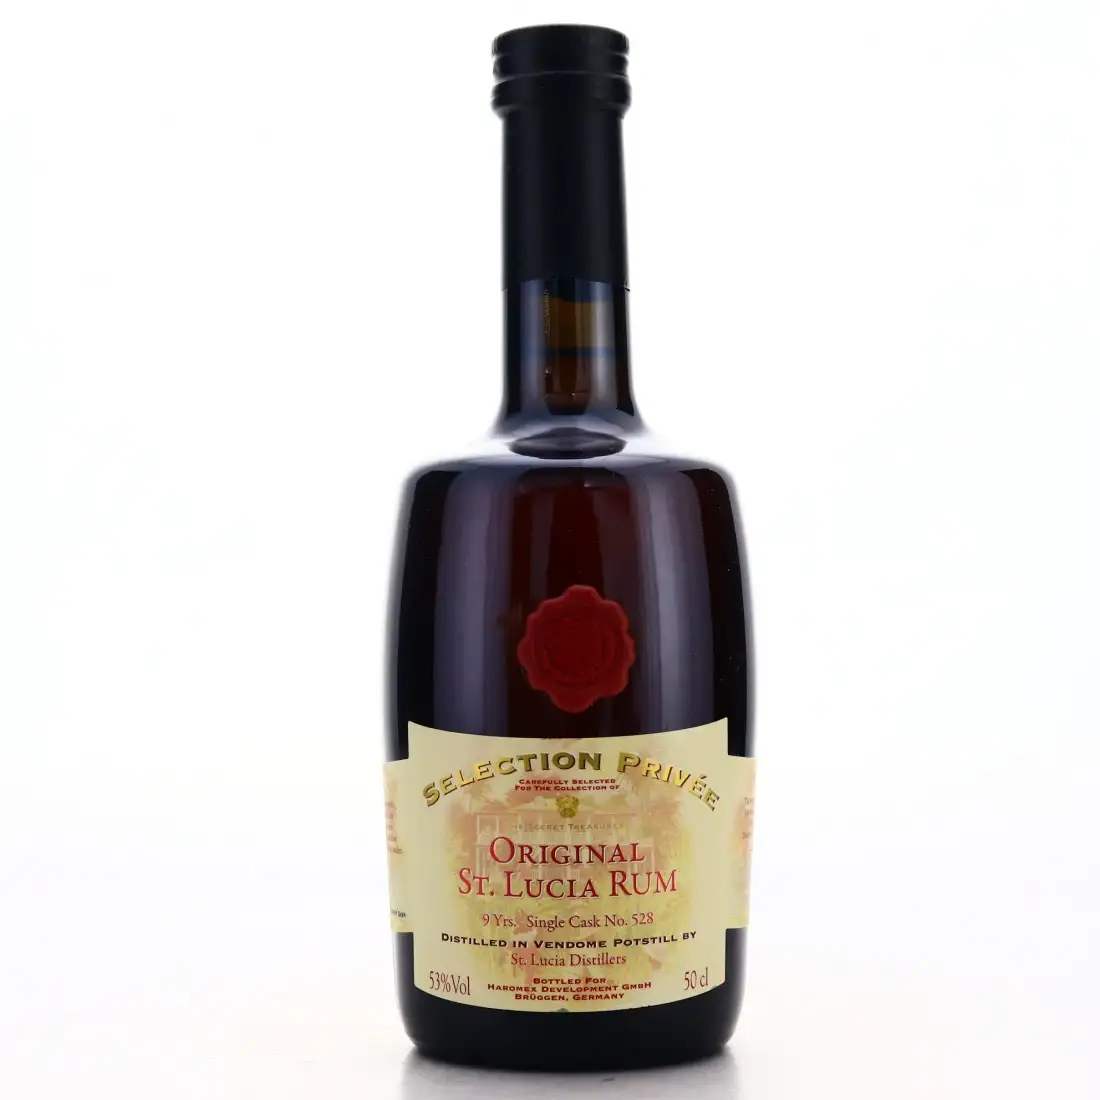 Image of the front of the bottle of the rum Secret Treasures The Selection Privée Vendome